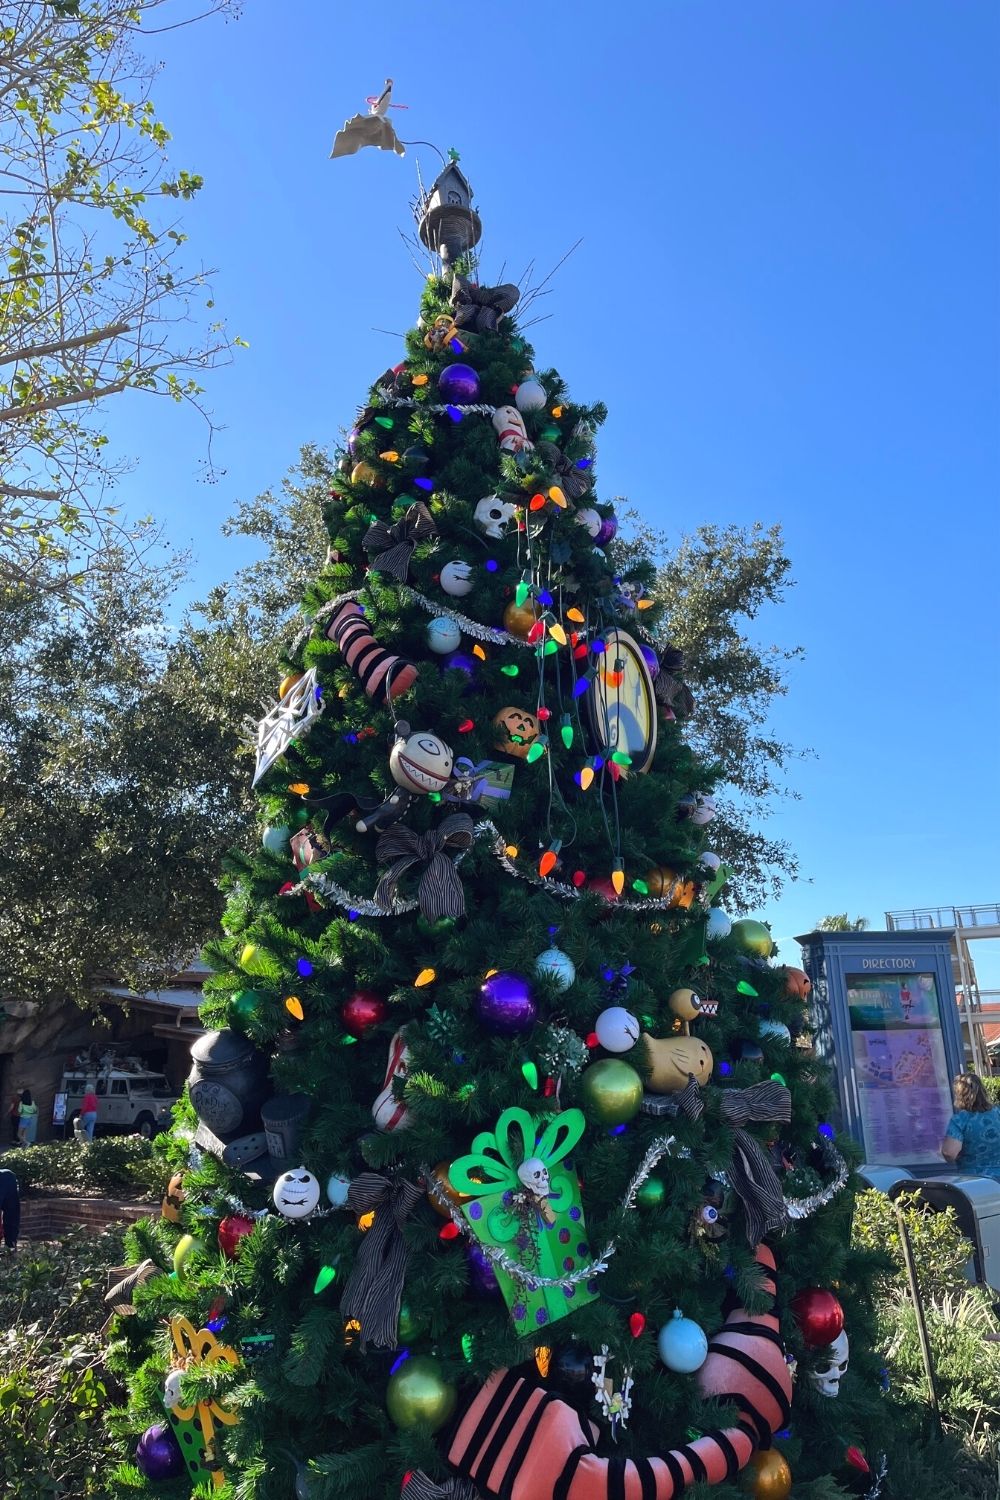 The Nightmare Before Christmas tree at the Christmas Tree trail in Disney Springs